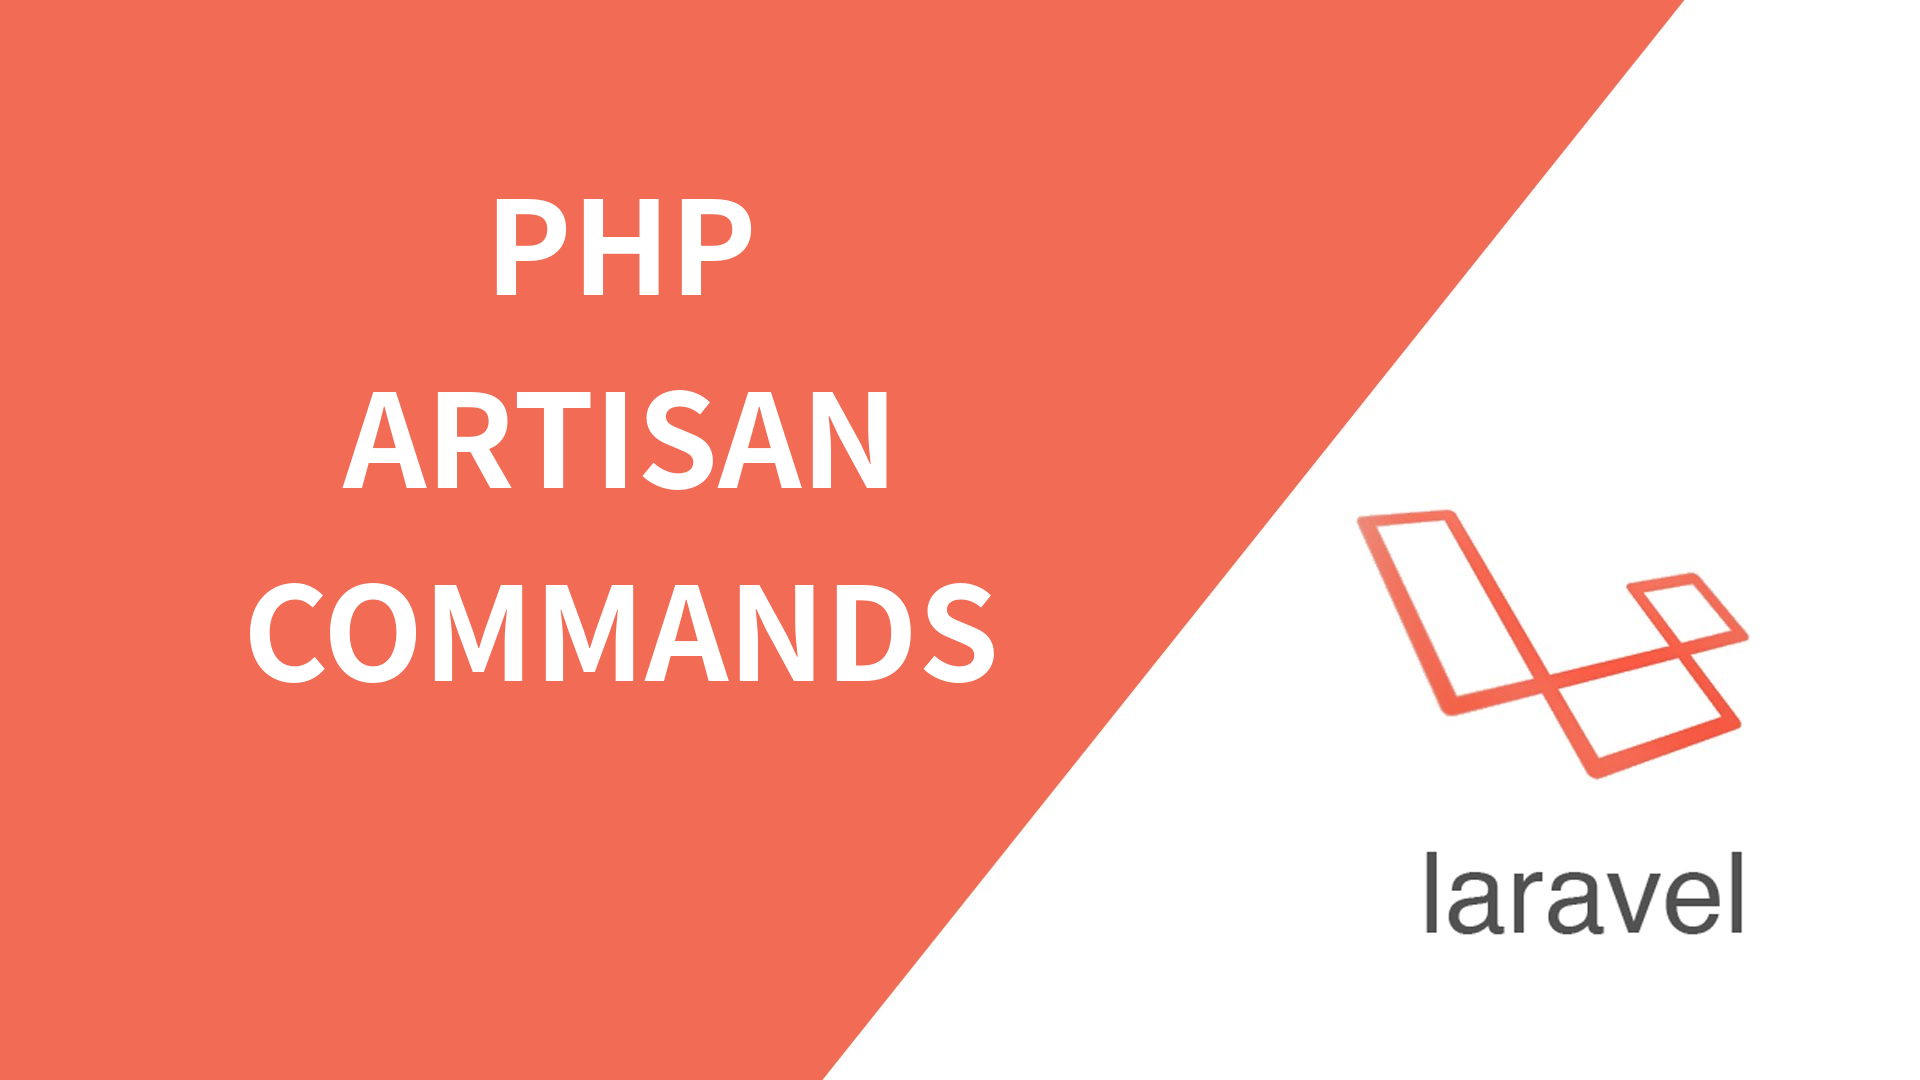 What is php artisan commands in Laravel